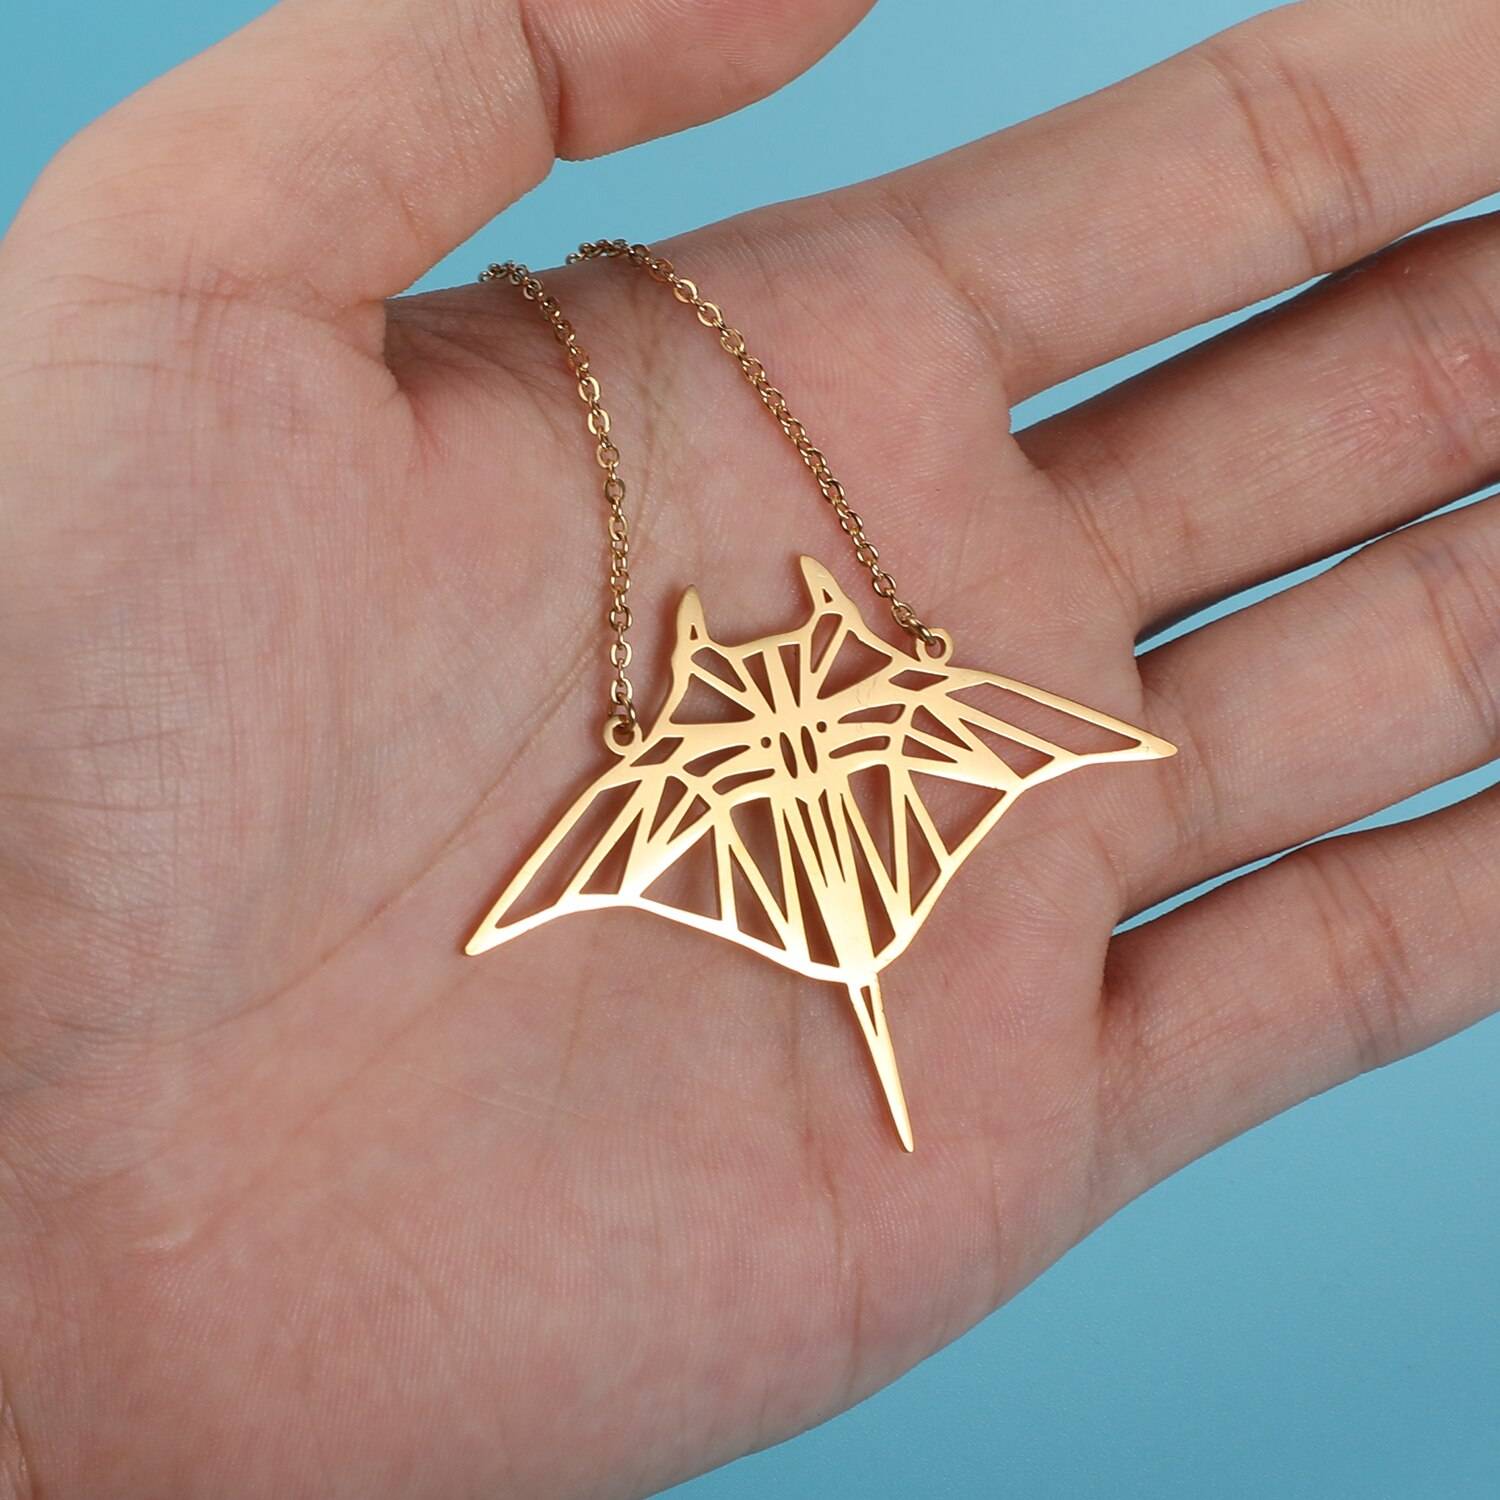 Sensitive Stingray Origami Necklace in hand